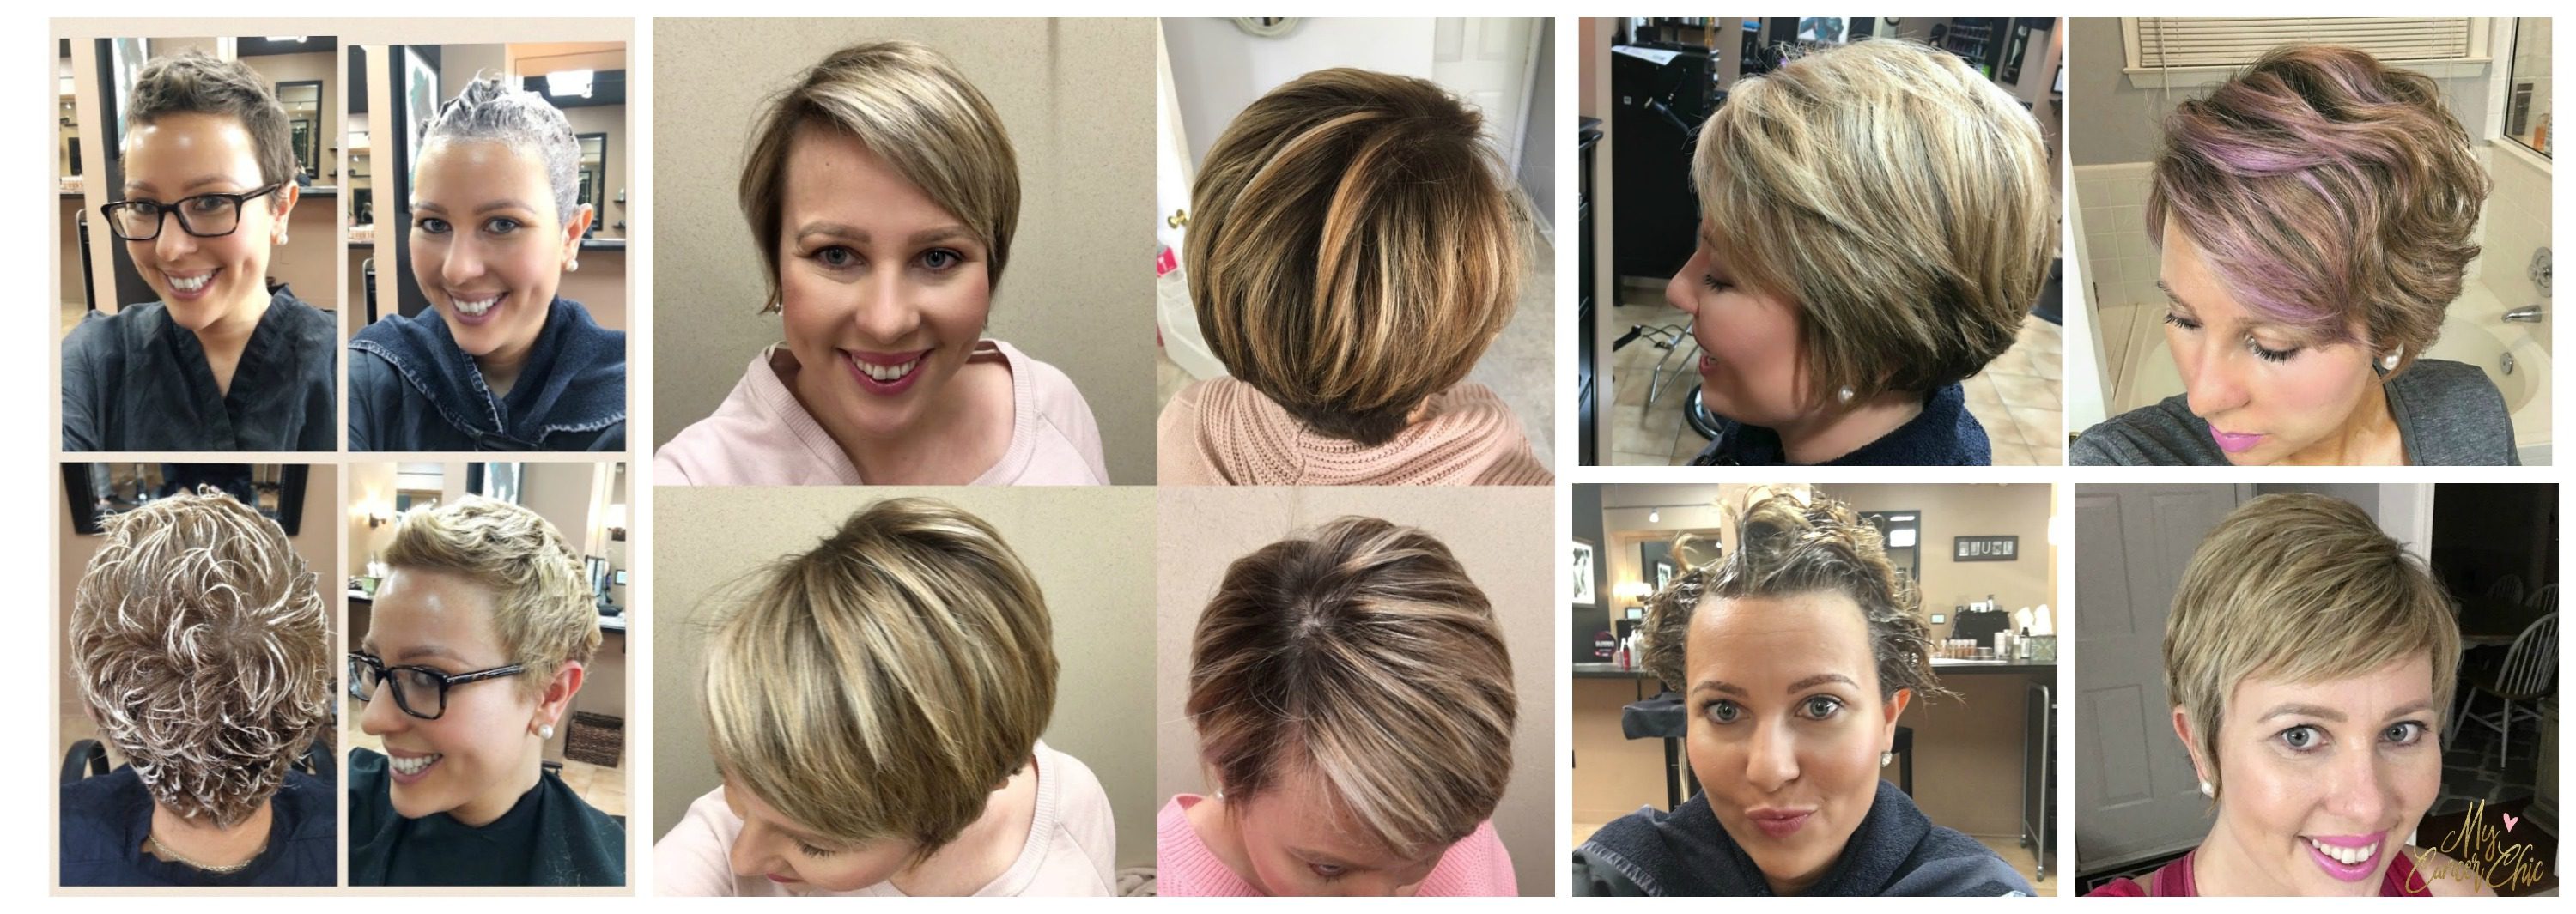 Coloring Hair After Chemo